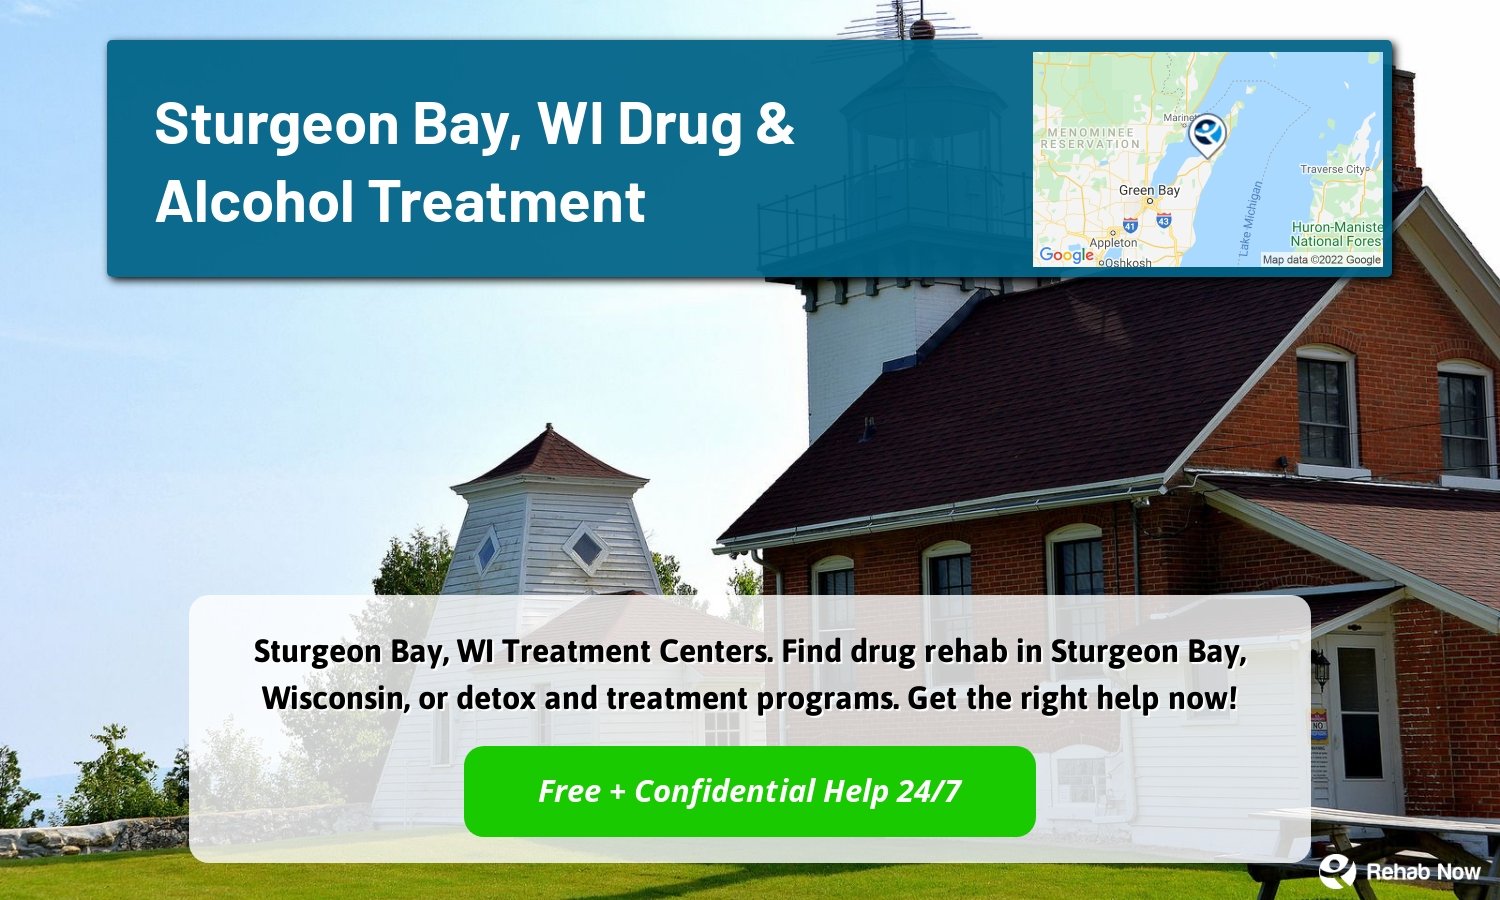 Sturgeon Bay, WI Treatment Centers. Find drug rehab in Sturgeon Bay, Wisconsin, or detox and treatment programs. Get the right help now!